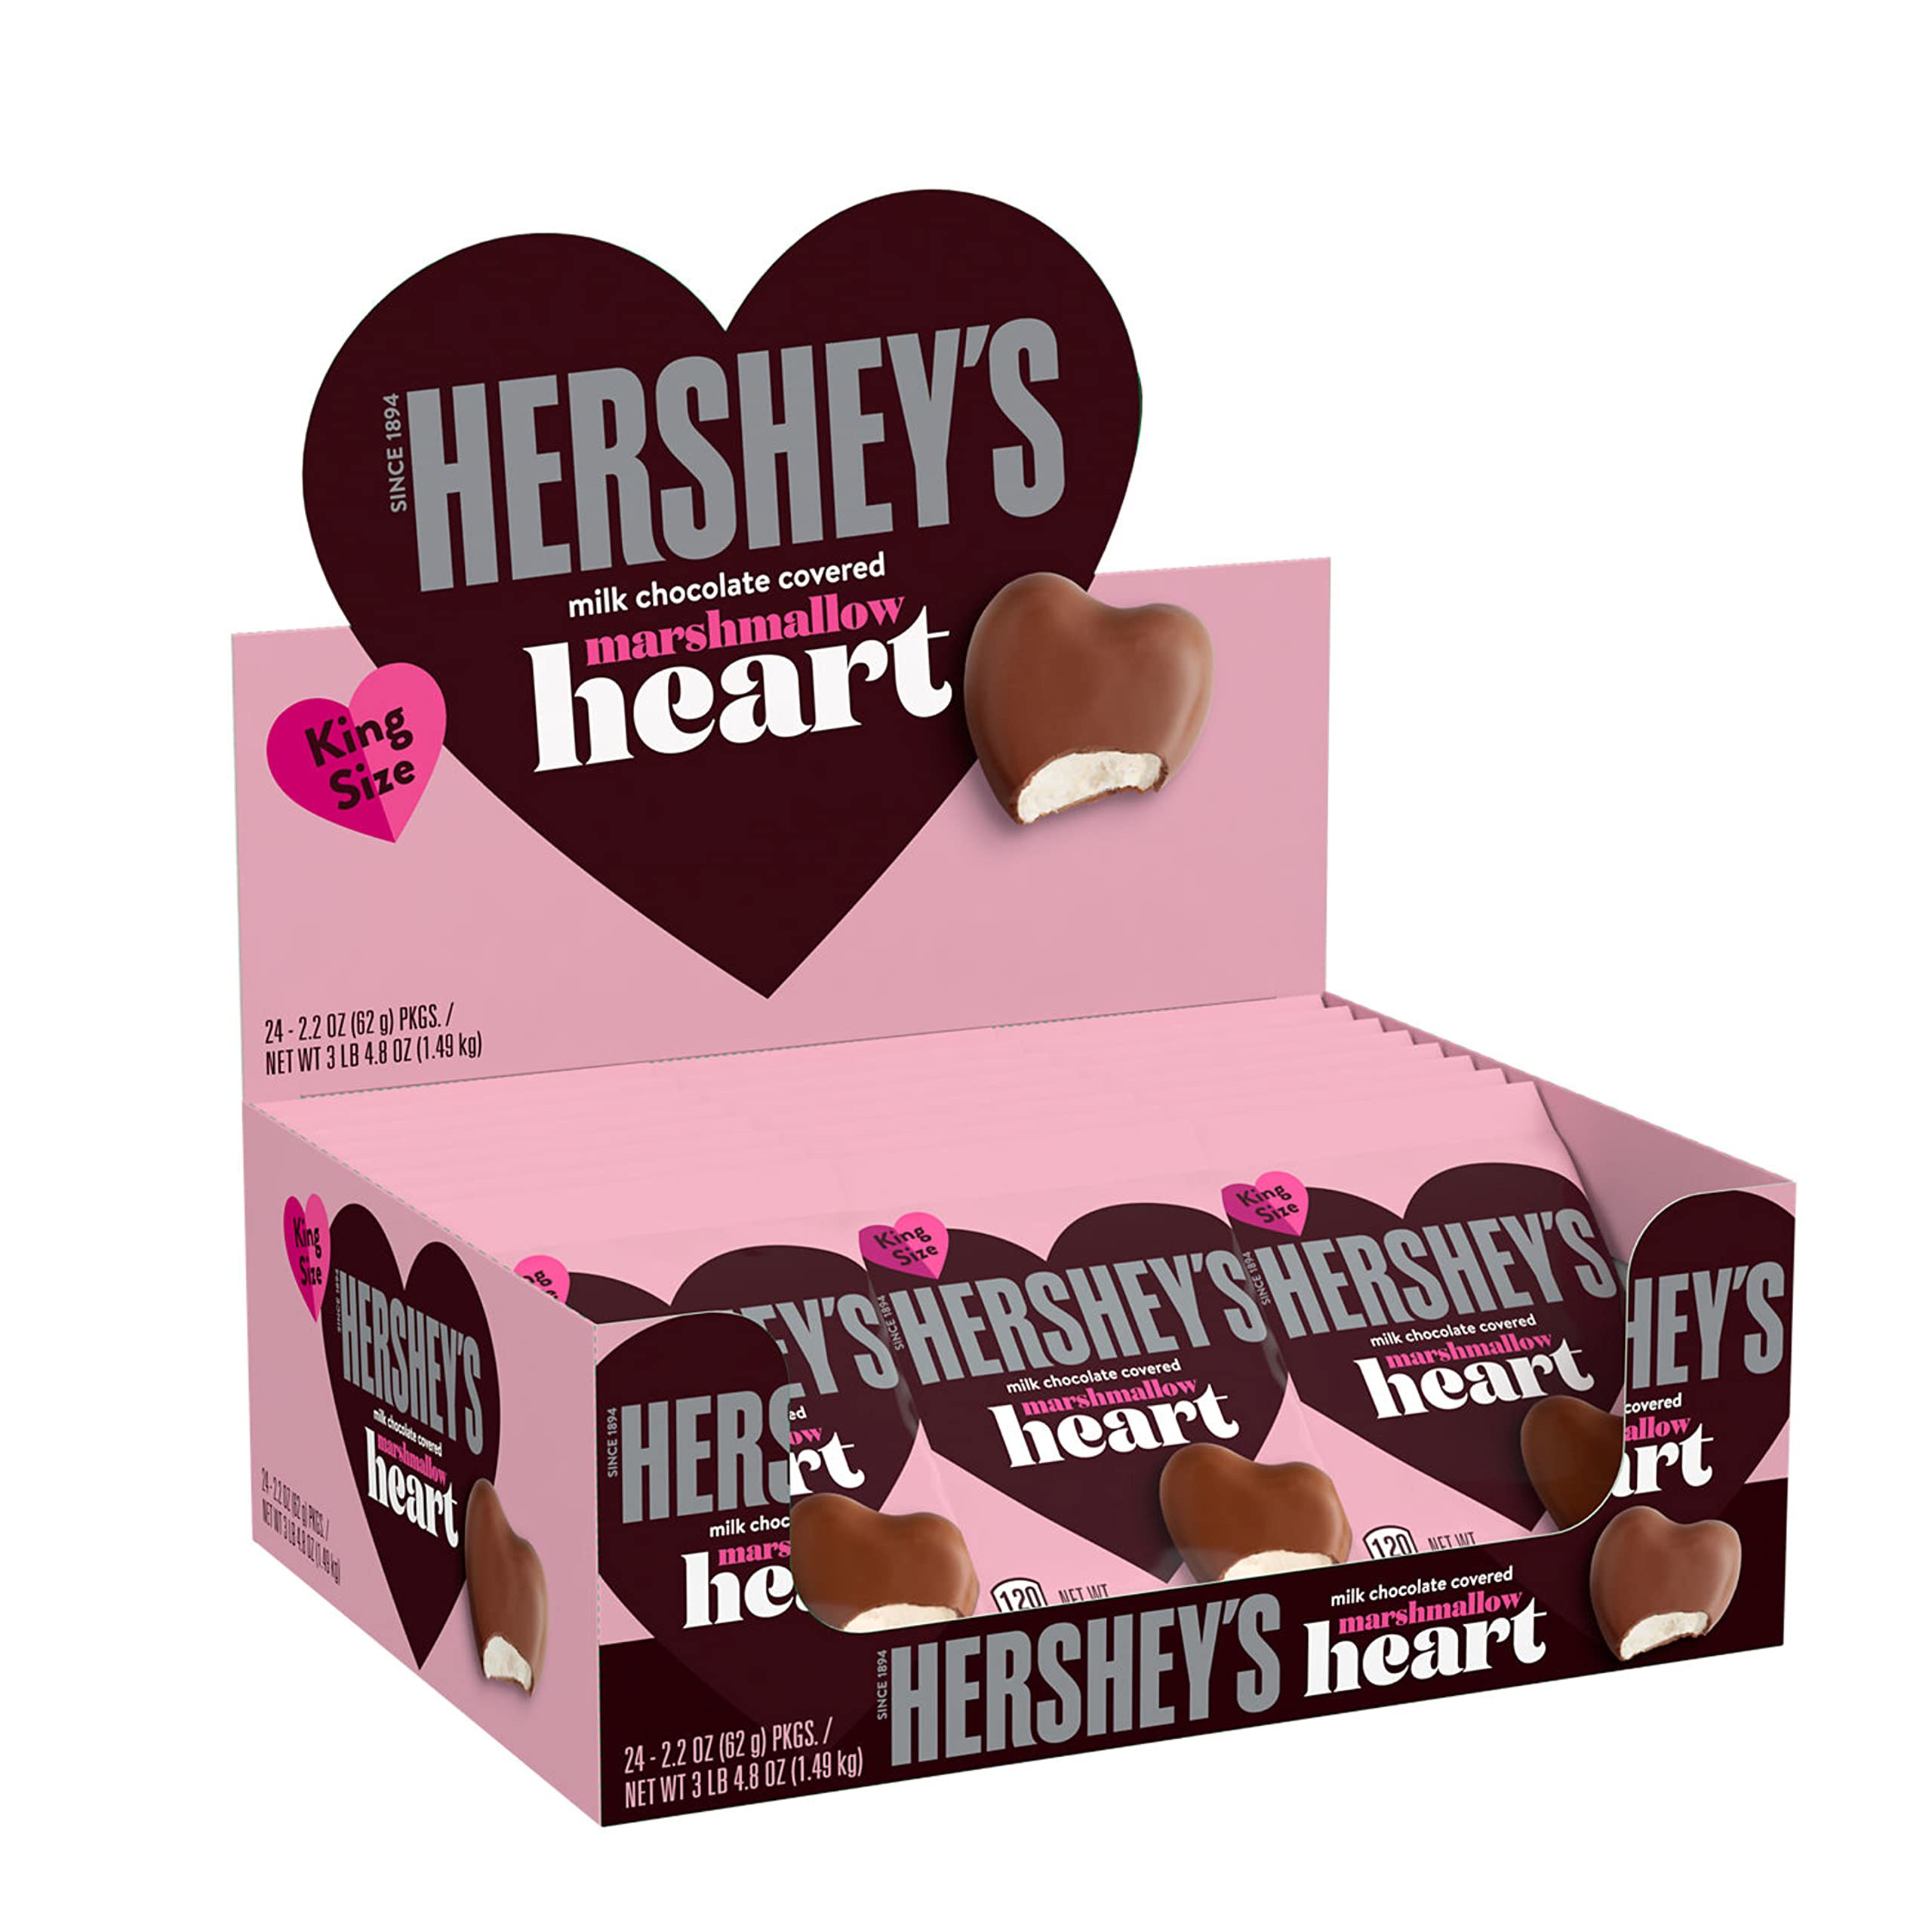 24-Count 2.2-Oz HERSHEY'S Milk Chocolate Covered Marshmallow Heart, Valentine's Day Candy Packs $38.99